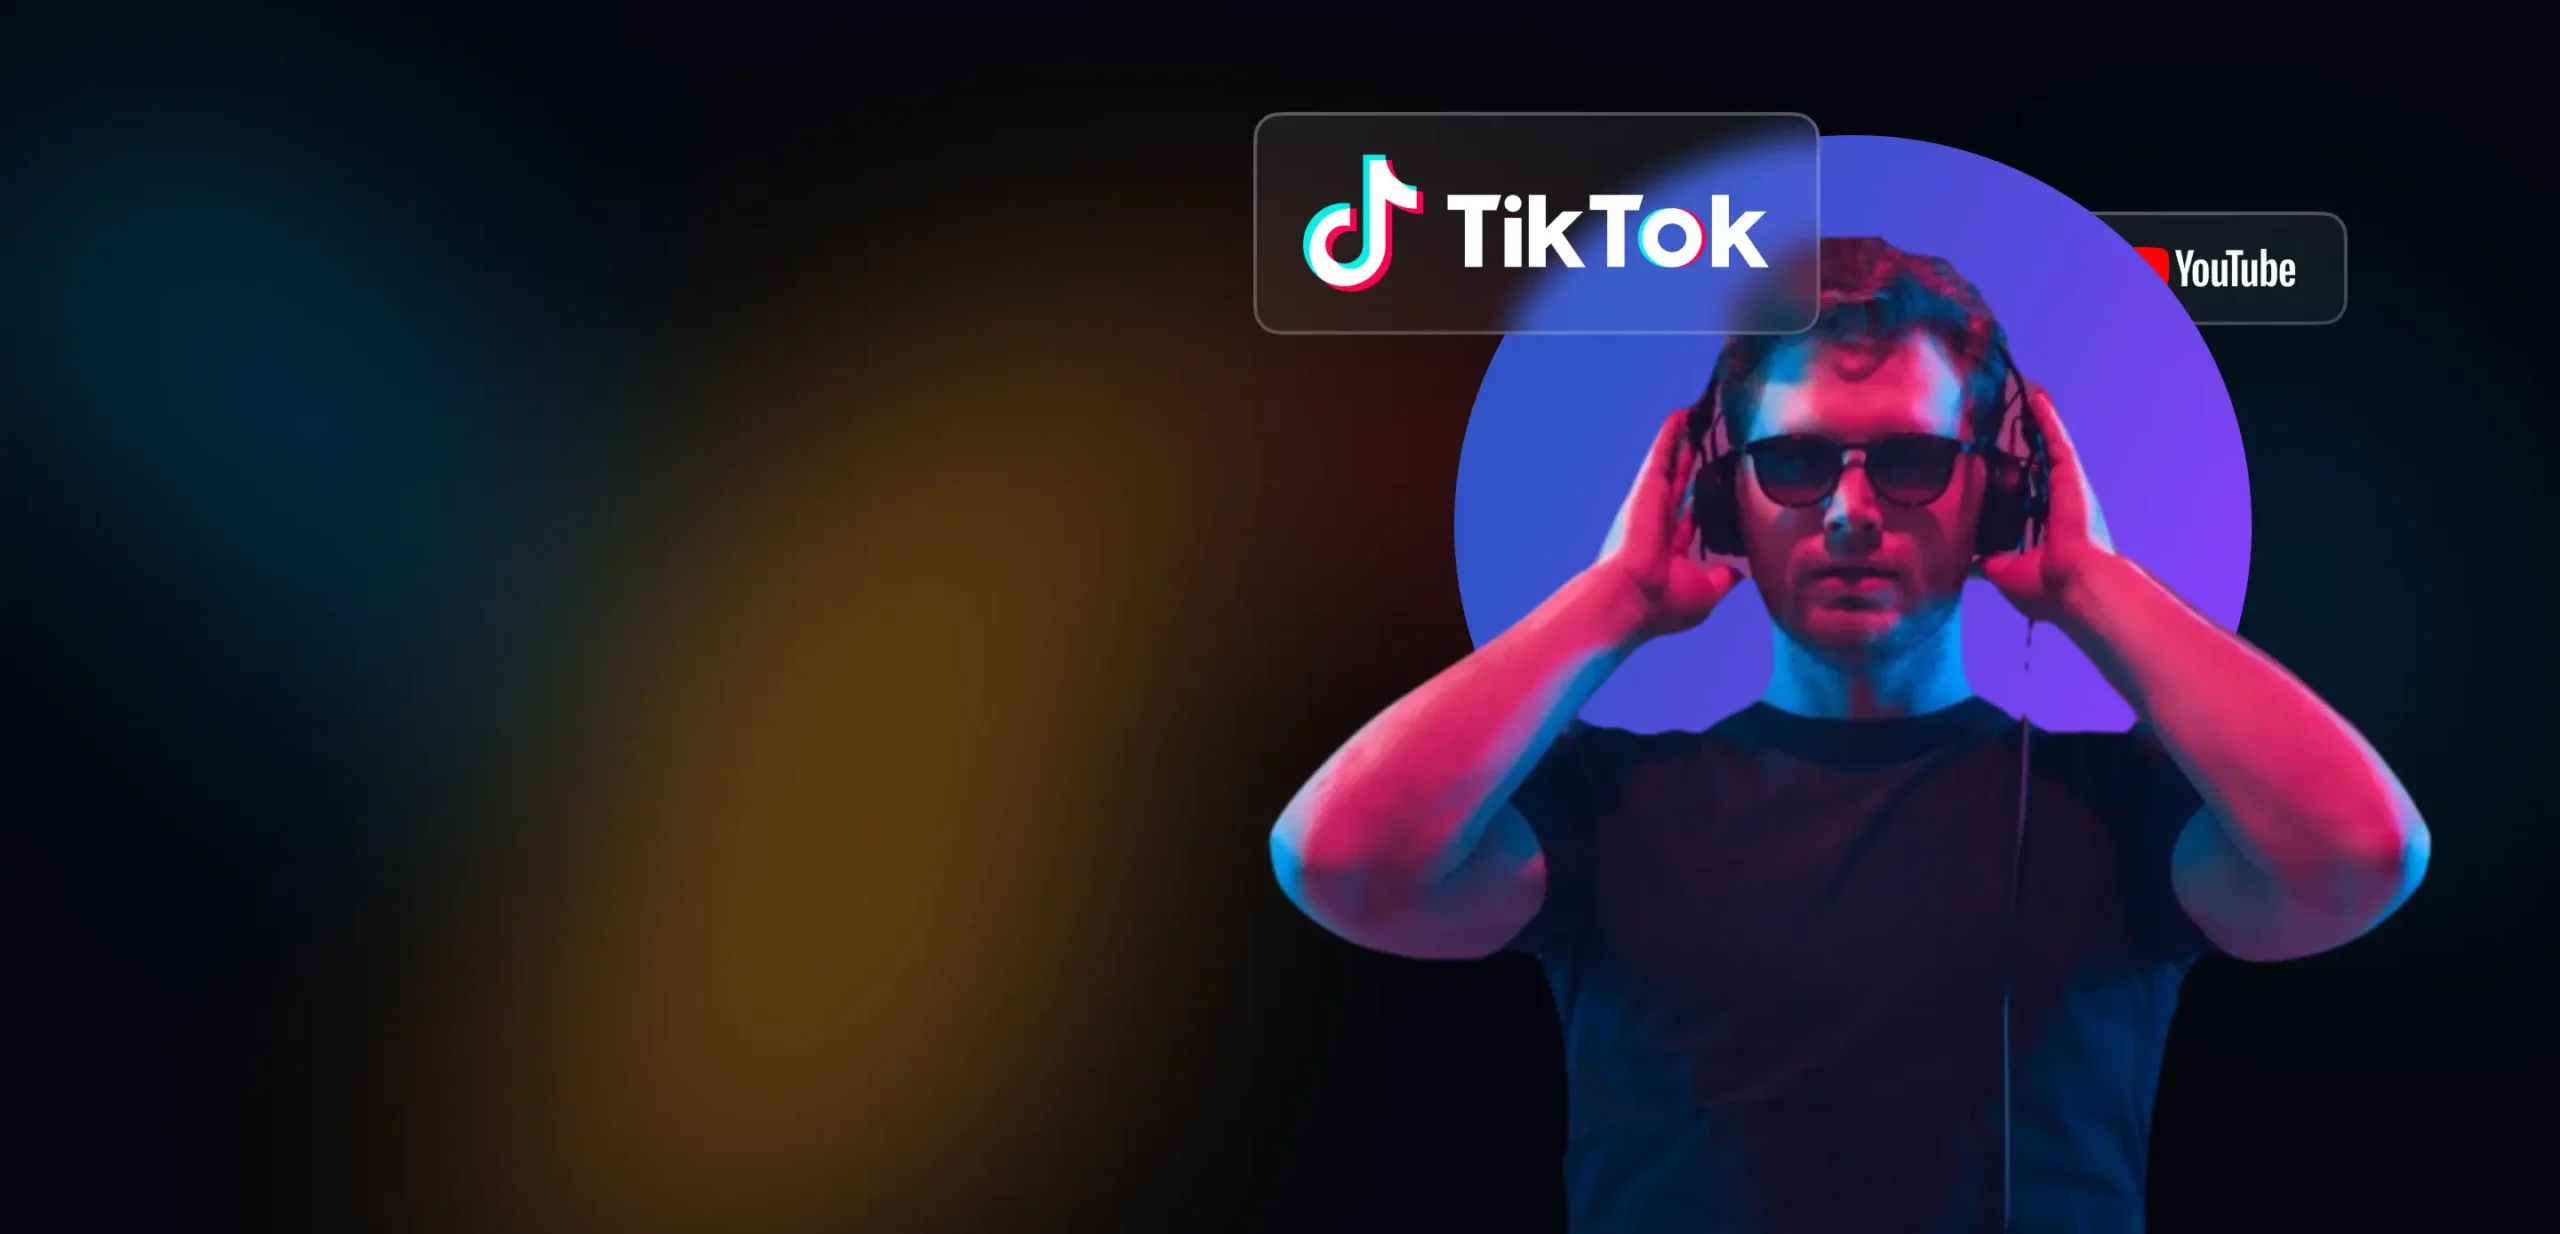 HOW TO UPLOAD YOUR MUSIC ON TIKTOK